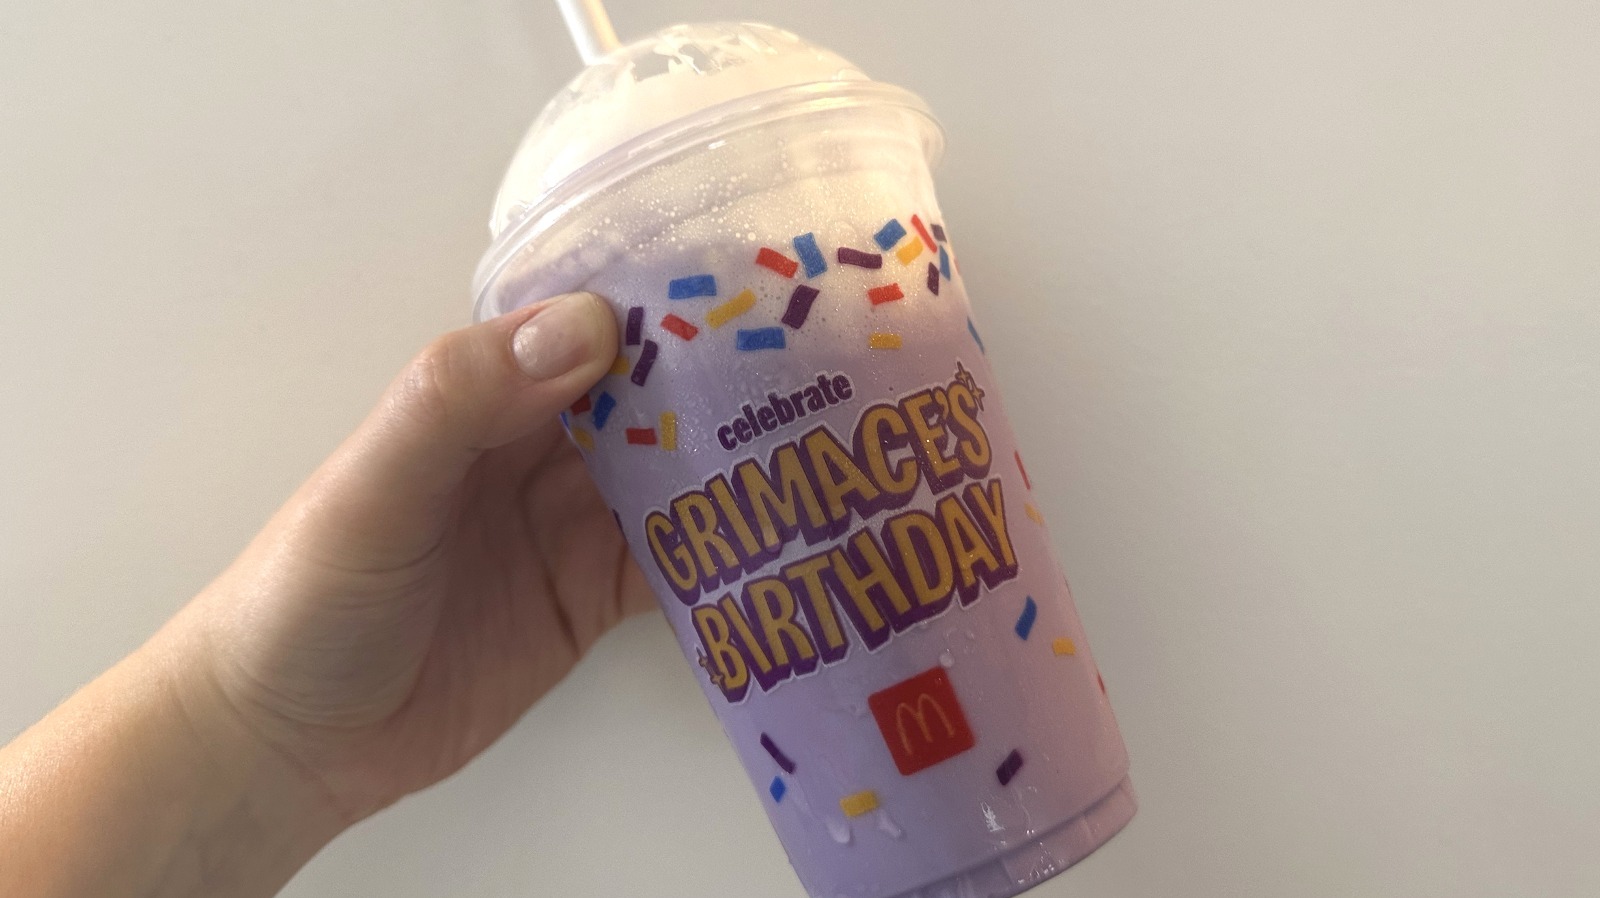 McDonald's customer stunned by feature on drink lid